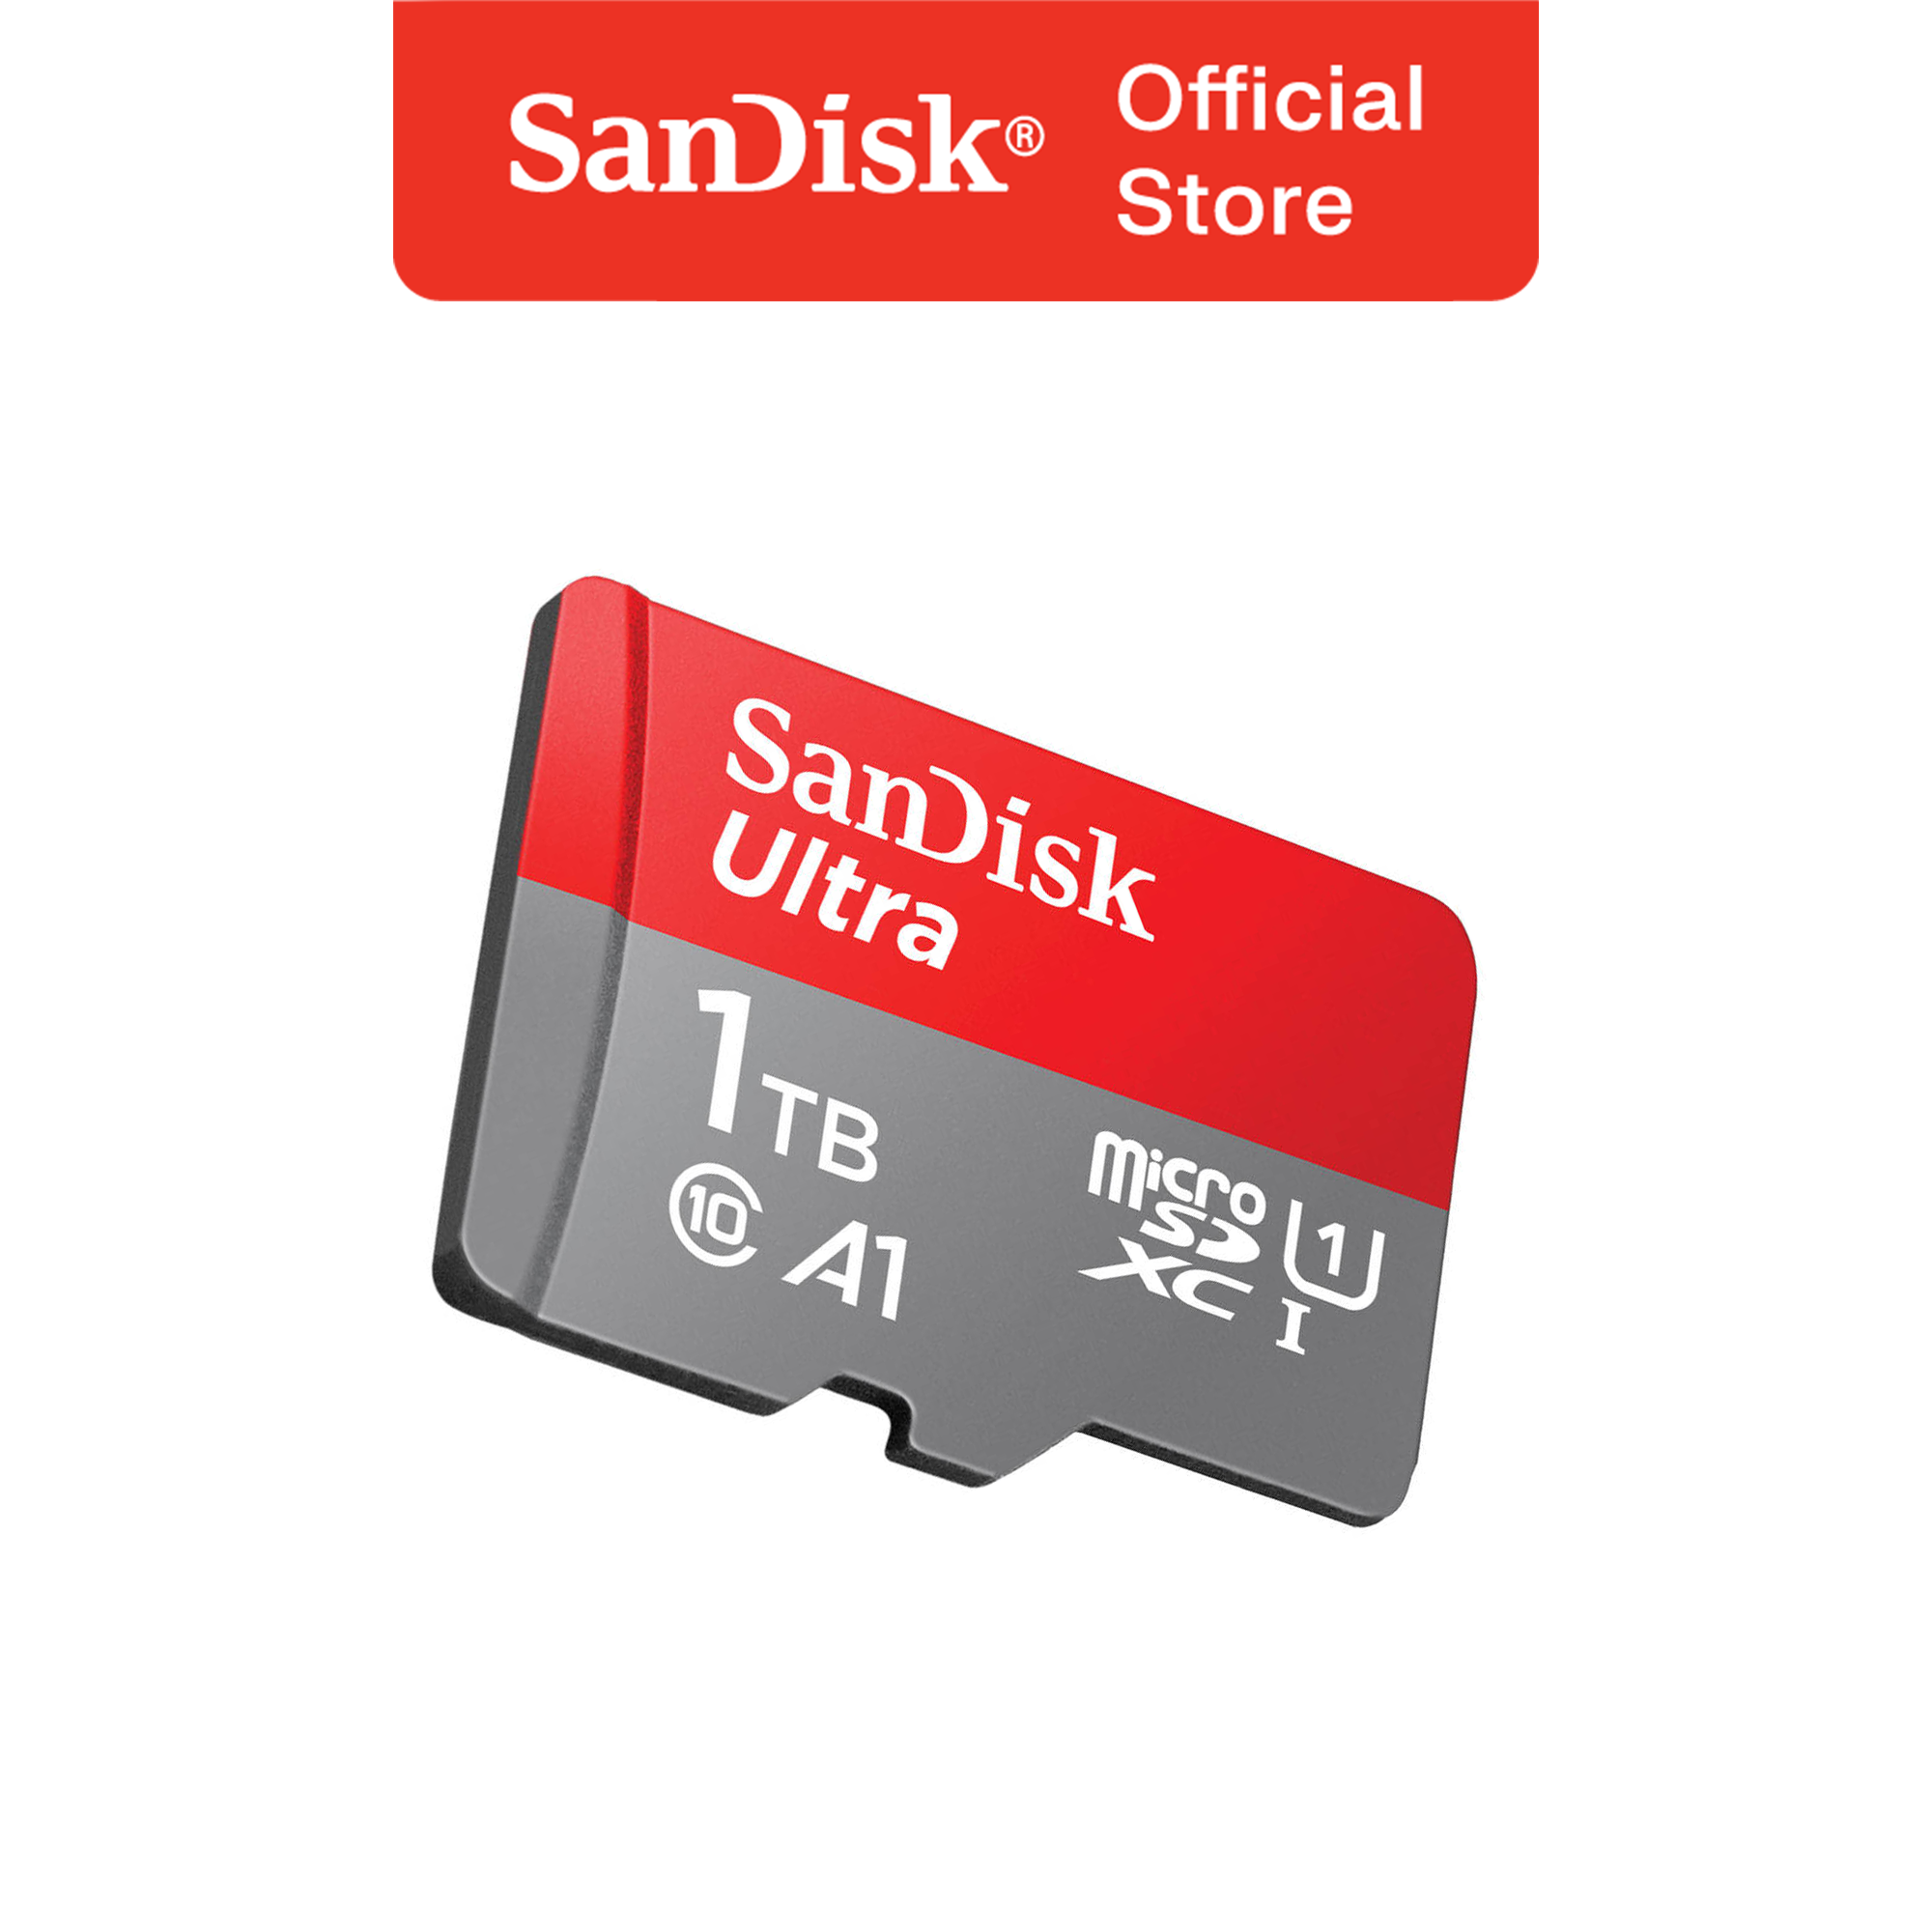 SanDisk Ultra 1TB (SDSQUAC-1T00-GN6MN), up to 150 MB/s Read Speed